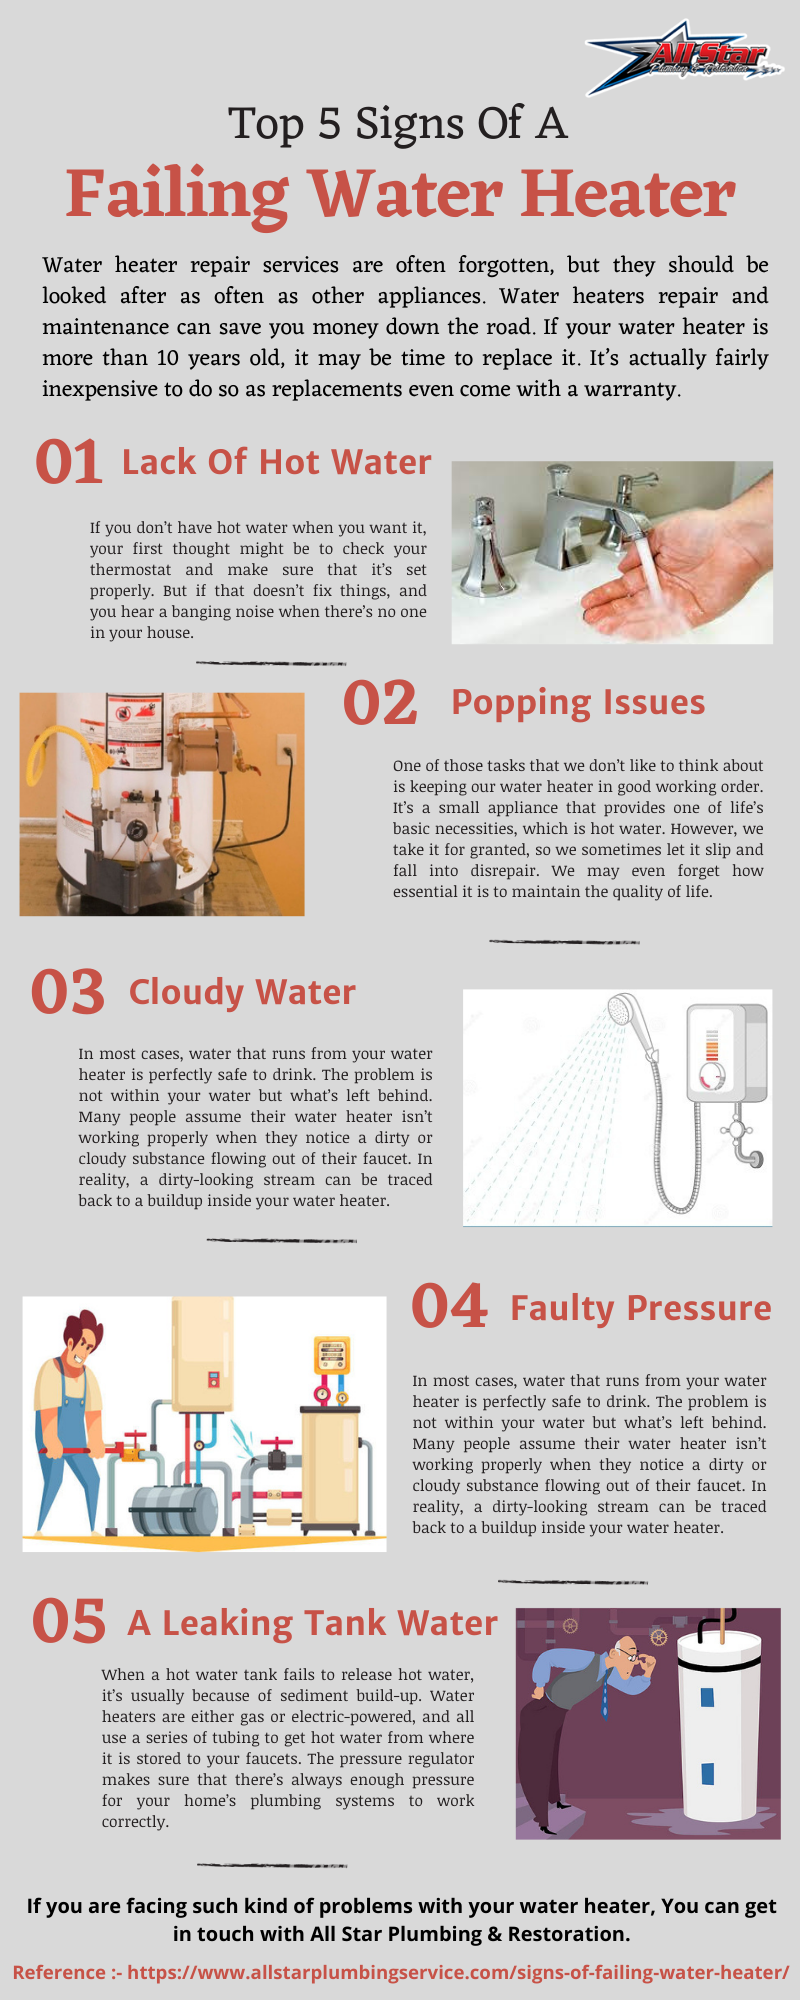 5 Signs Of A Failing Water Heater